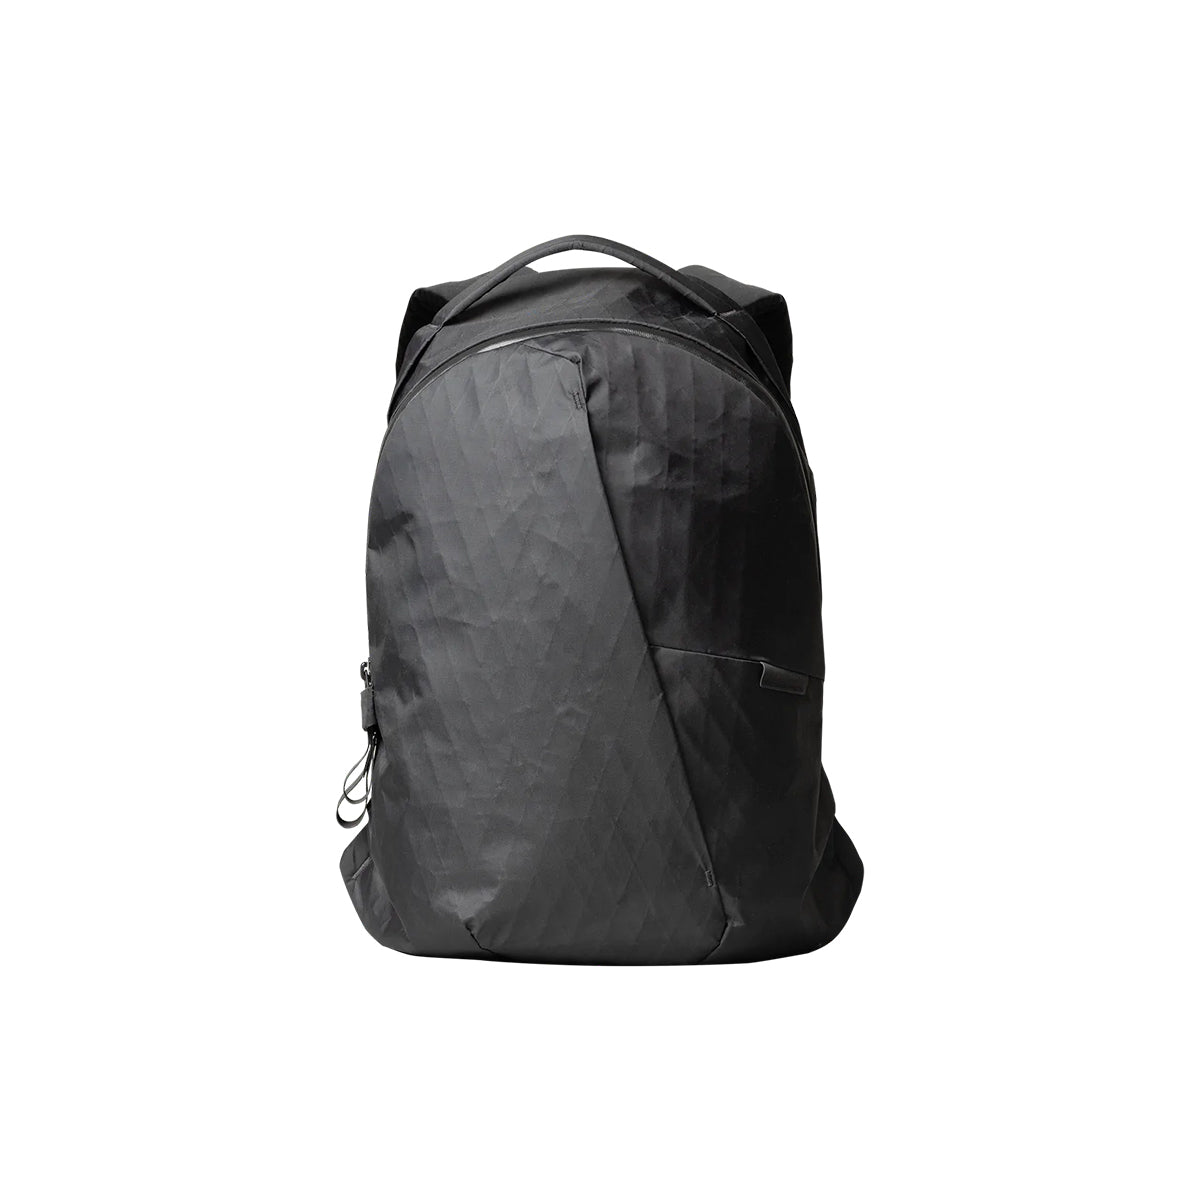 Thirteen Daybag by Able Carry | The Bag Creature